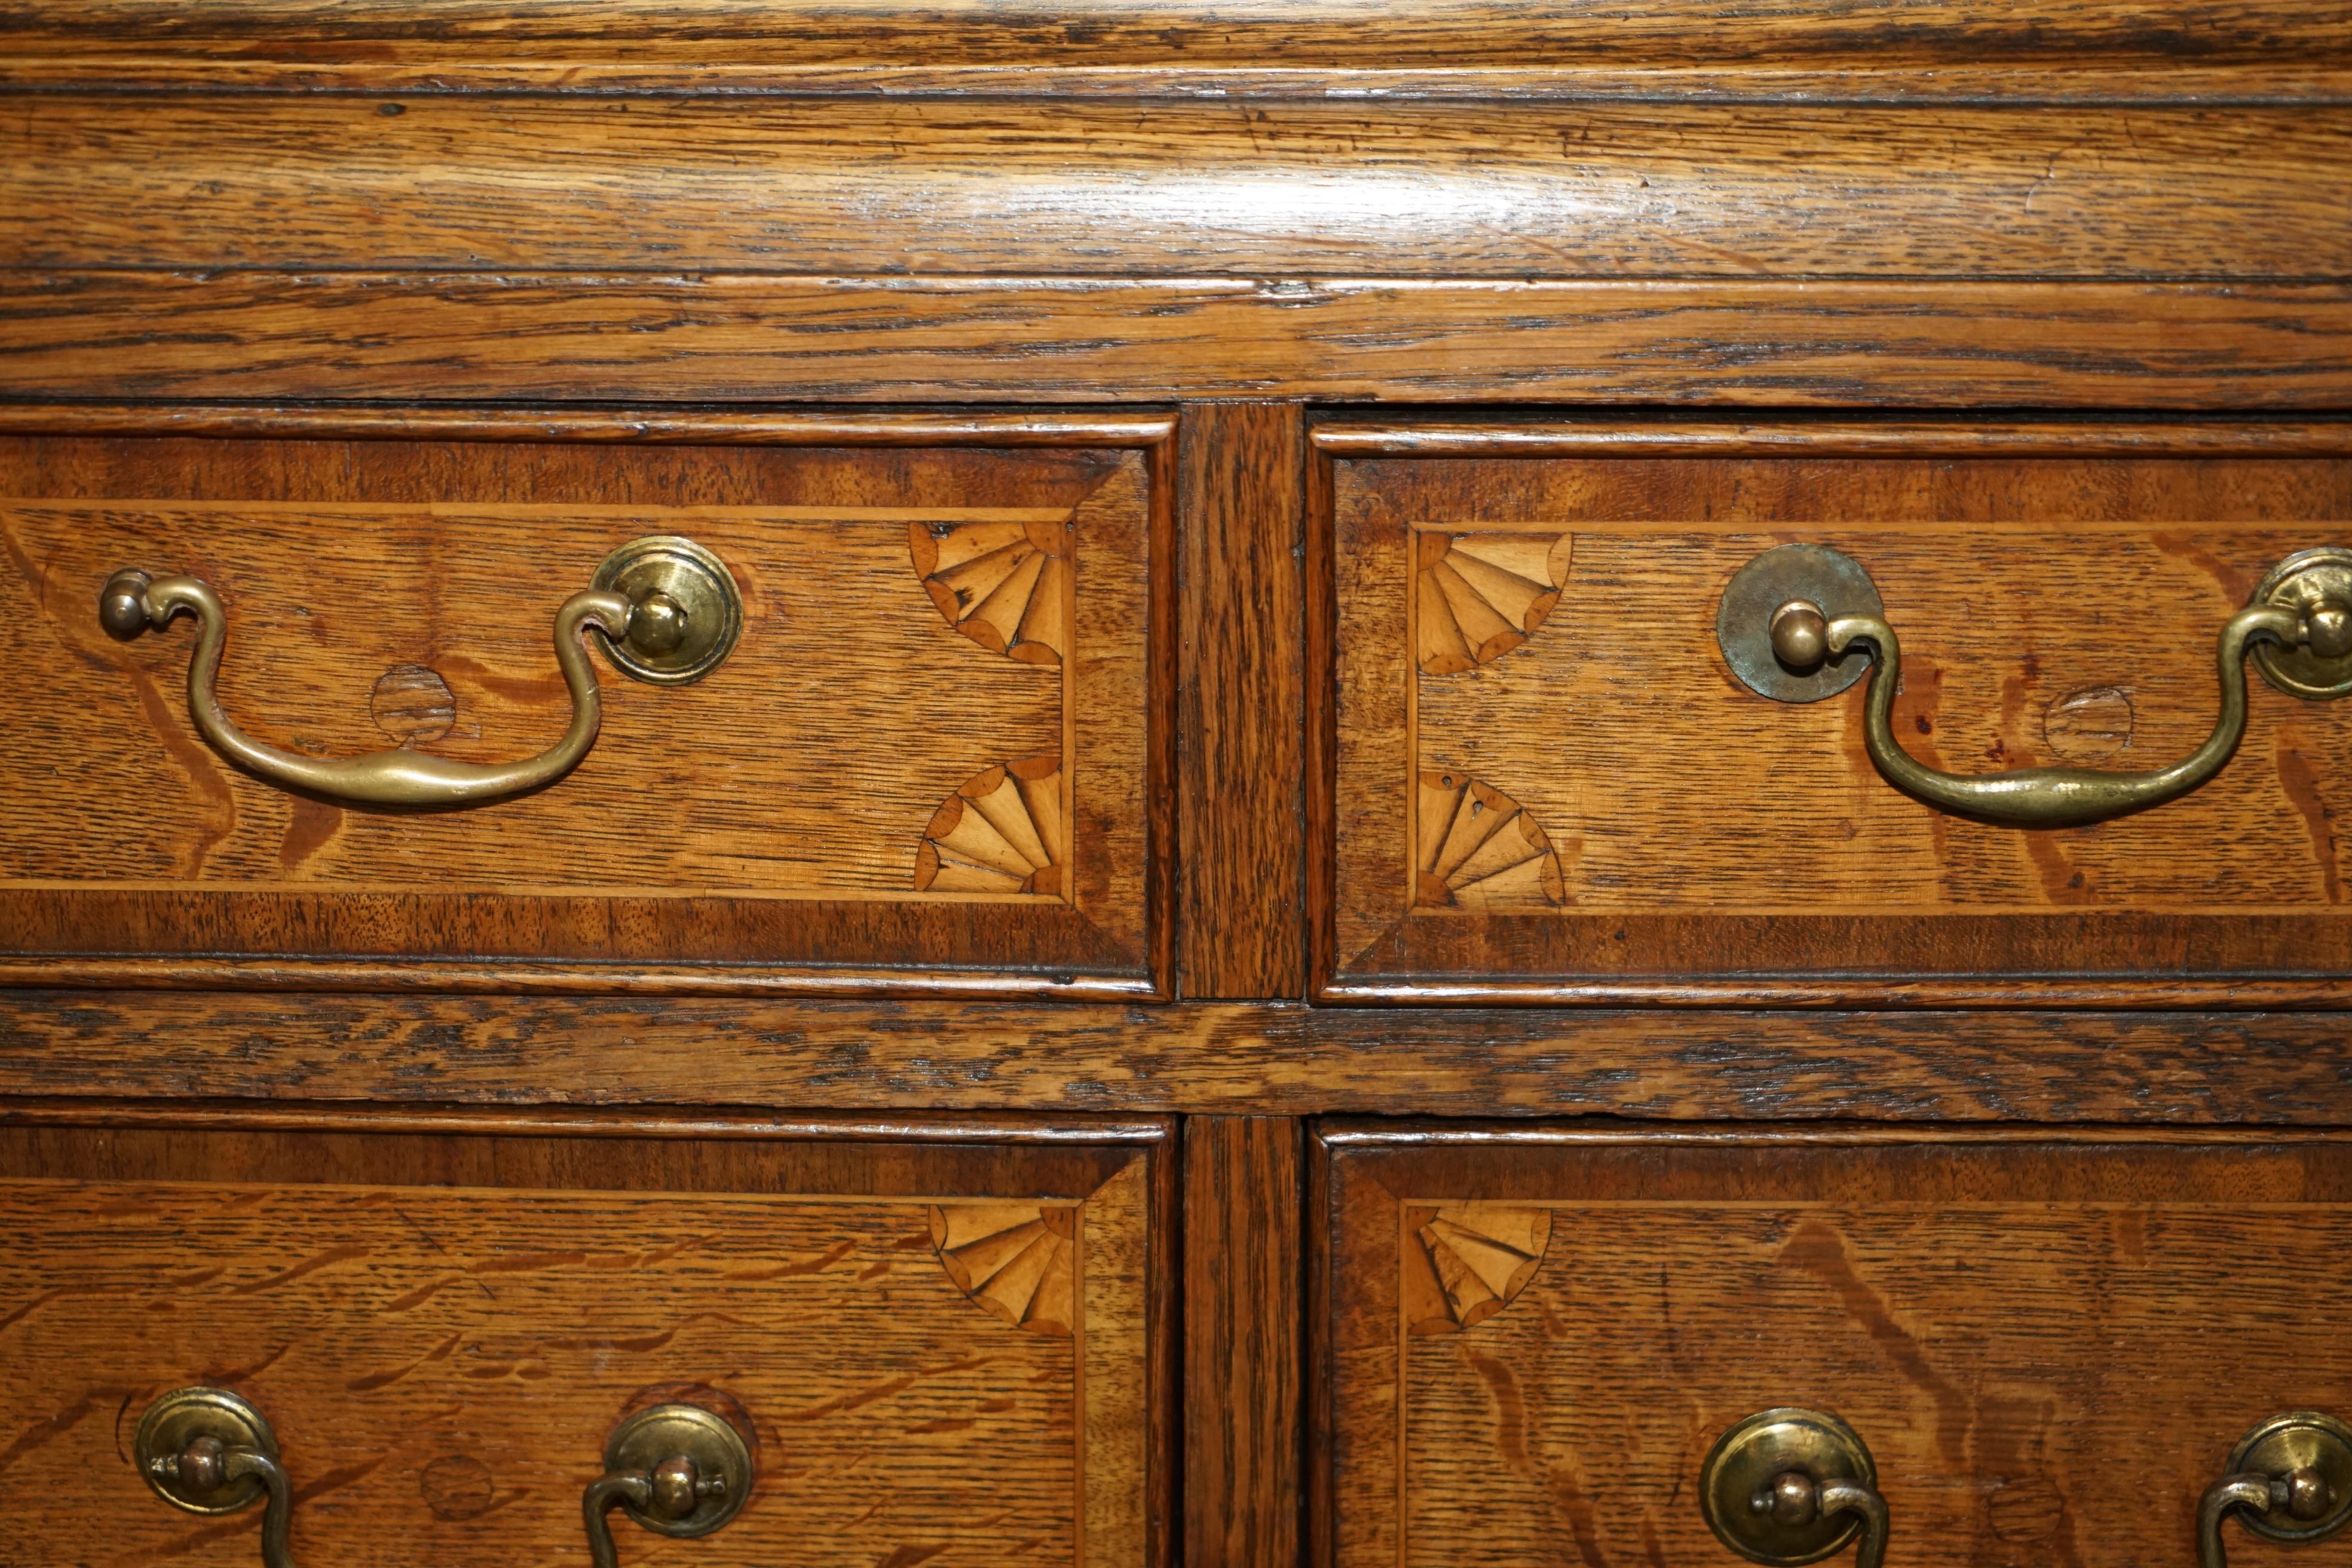 EXQUISITE ANTiQUE 1800 SHERATON INLAID HOUSEKEEPERS CUPBOARD WARDROBE DRAWERS For Sale 4